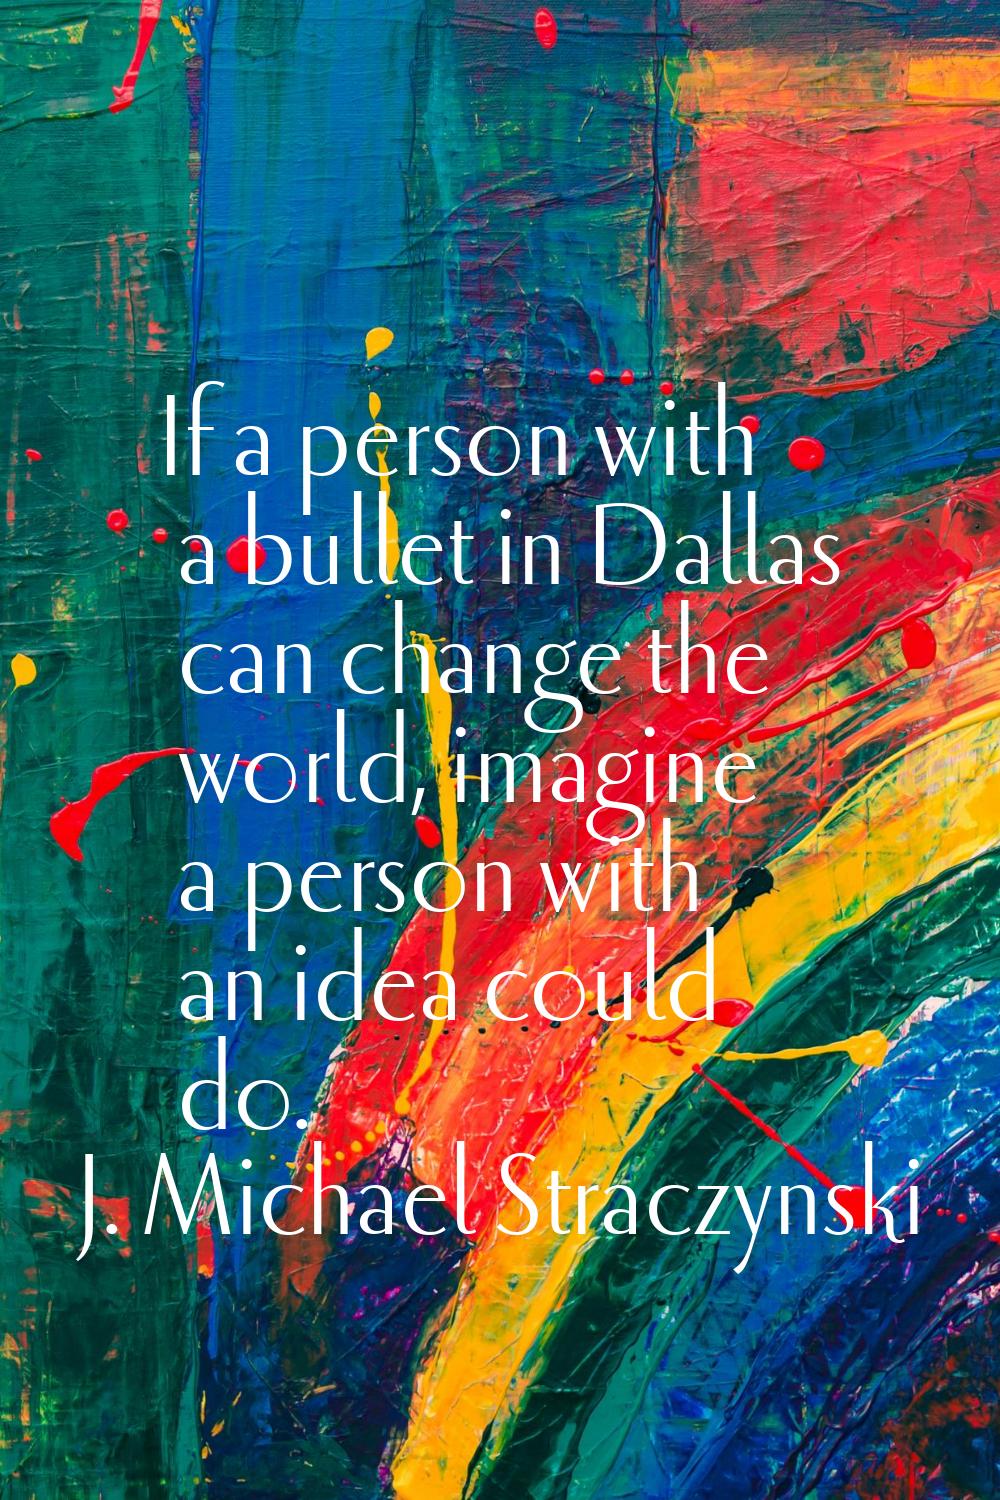 If a person with a bullet in Dallas can change the world, imagine a person with an idea could do.